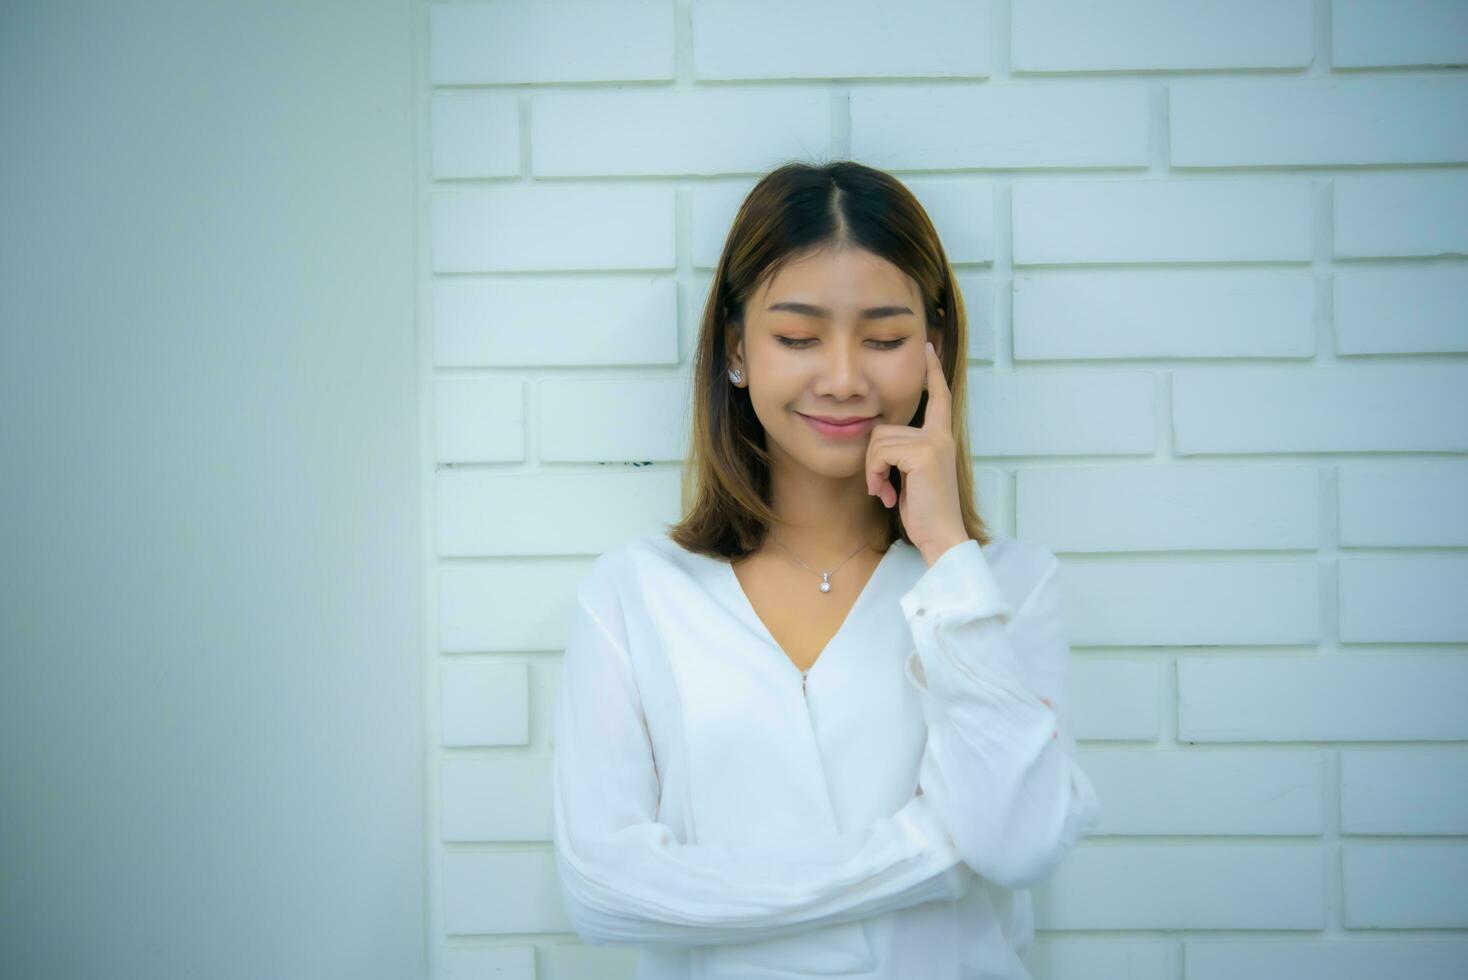 Beautiful asian business woman is standing against a white brick wall, with her hands on her cheeks smiling and closing her eyes, Digital marketing. photo